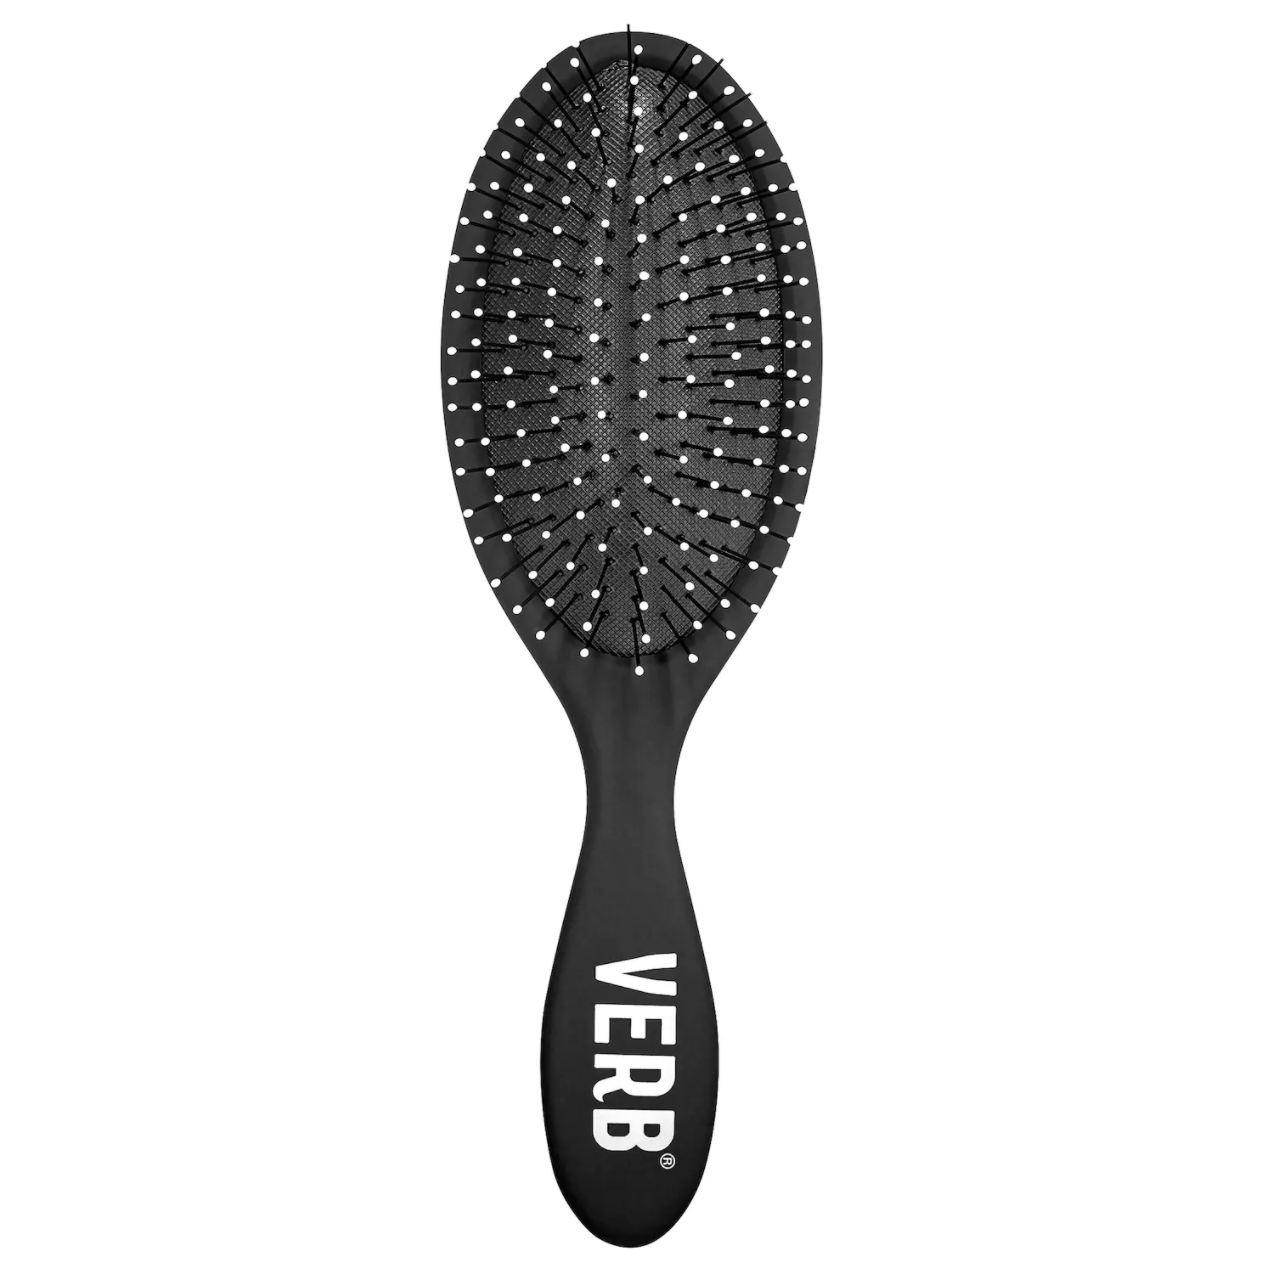 The brush with a black handle and bristles